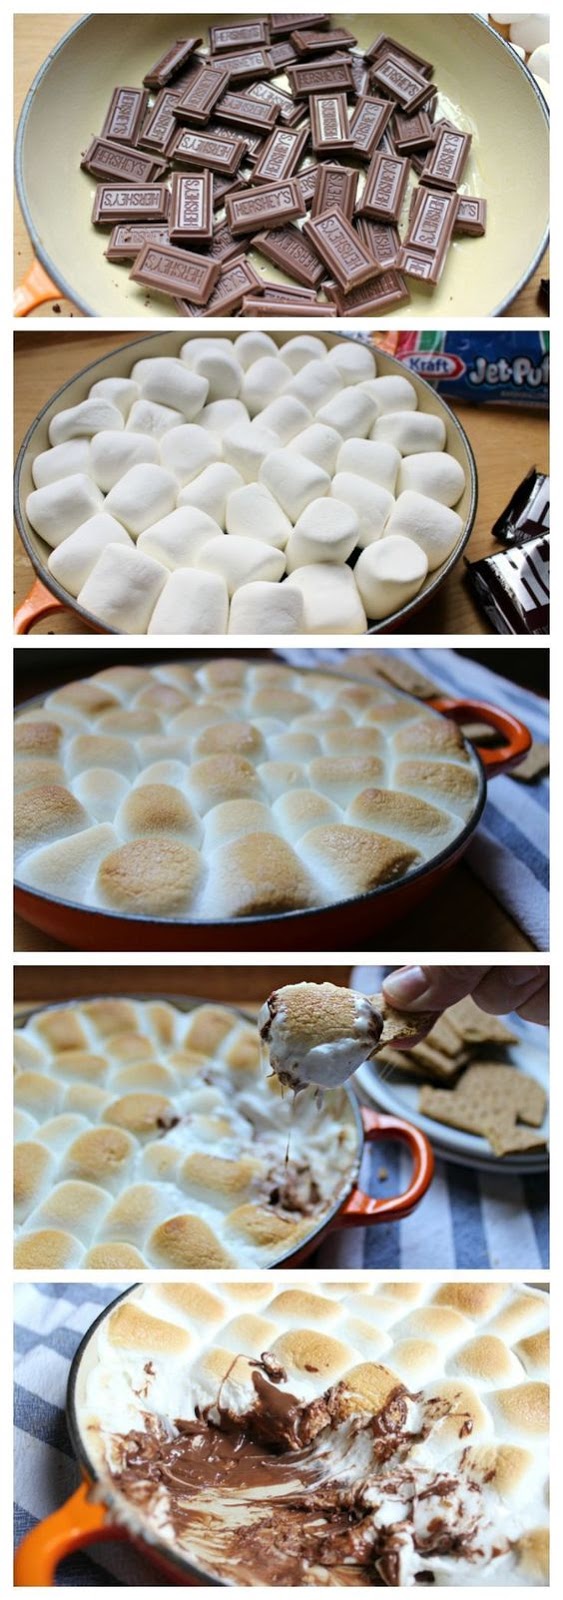 This recipe is awesome! It's so easy to make S'mores without a campfire. (Perfect for when it's raining.) Check out this fun recipe for the family. #HersheysSummer #ad